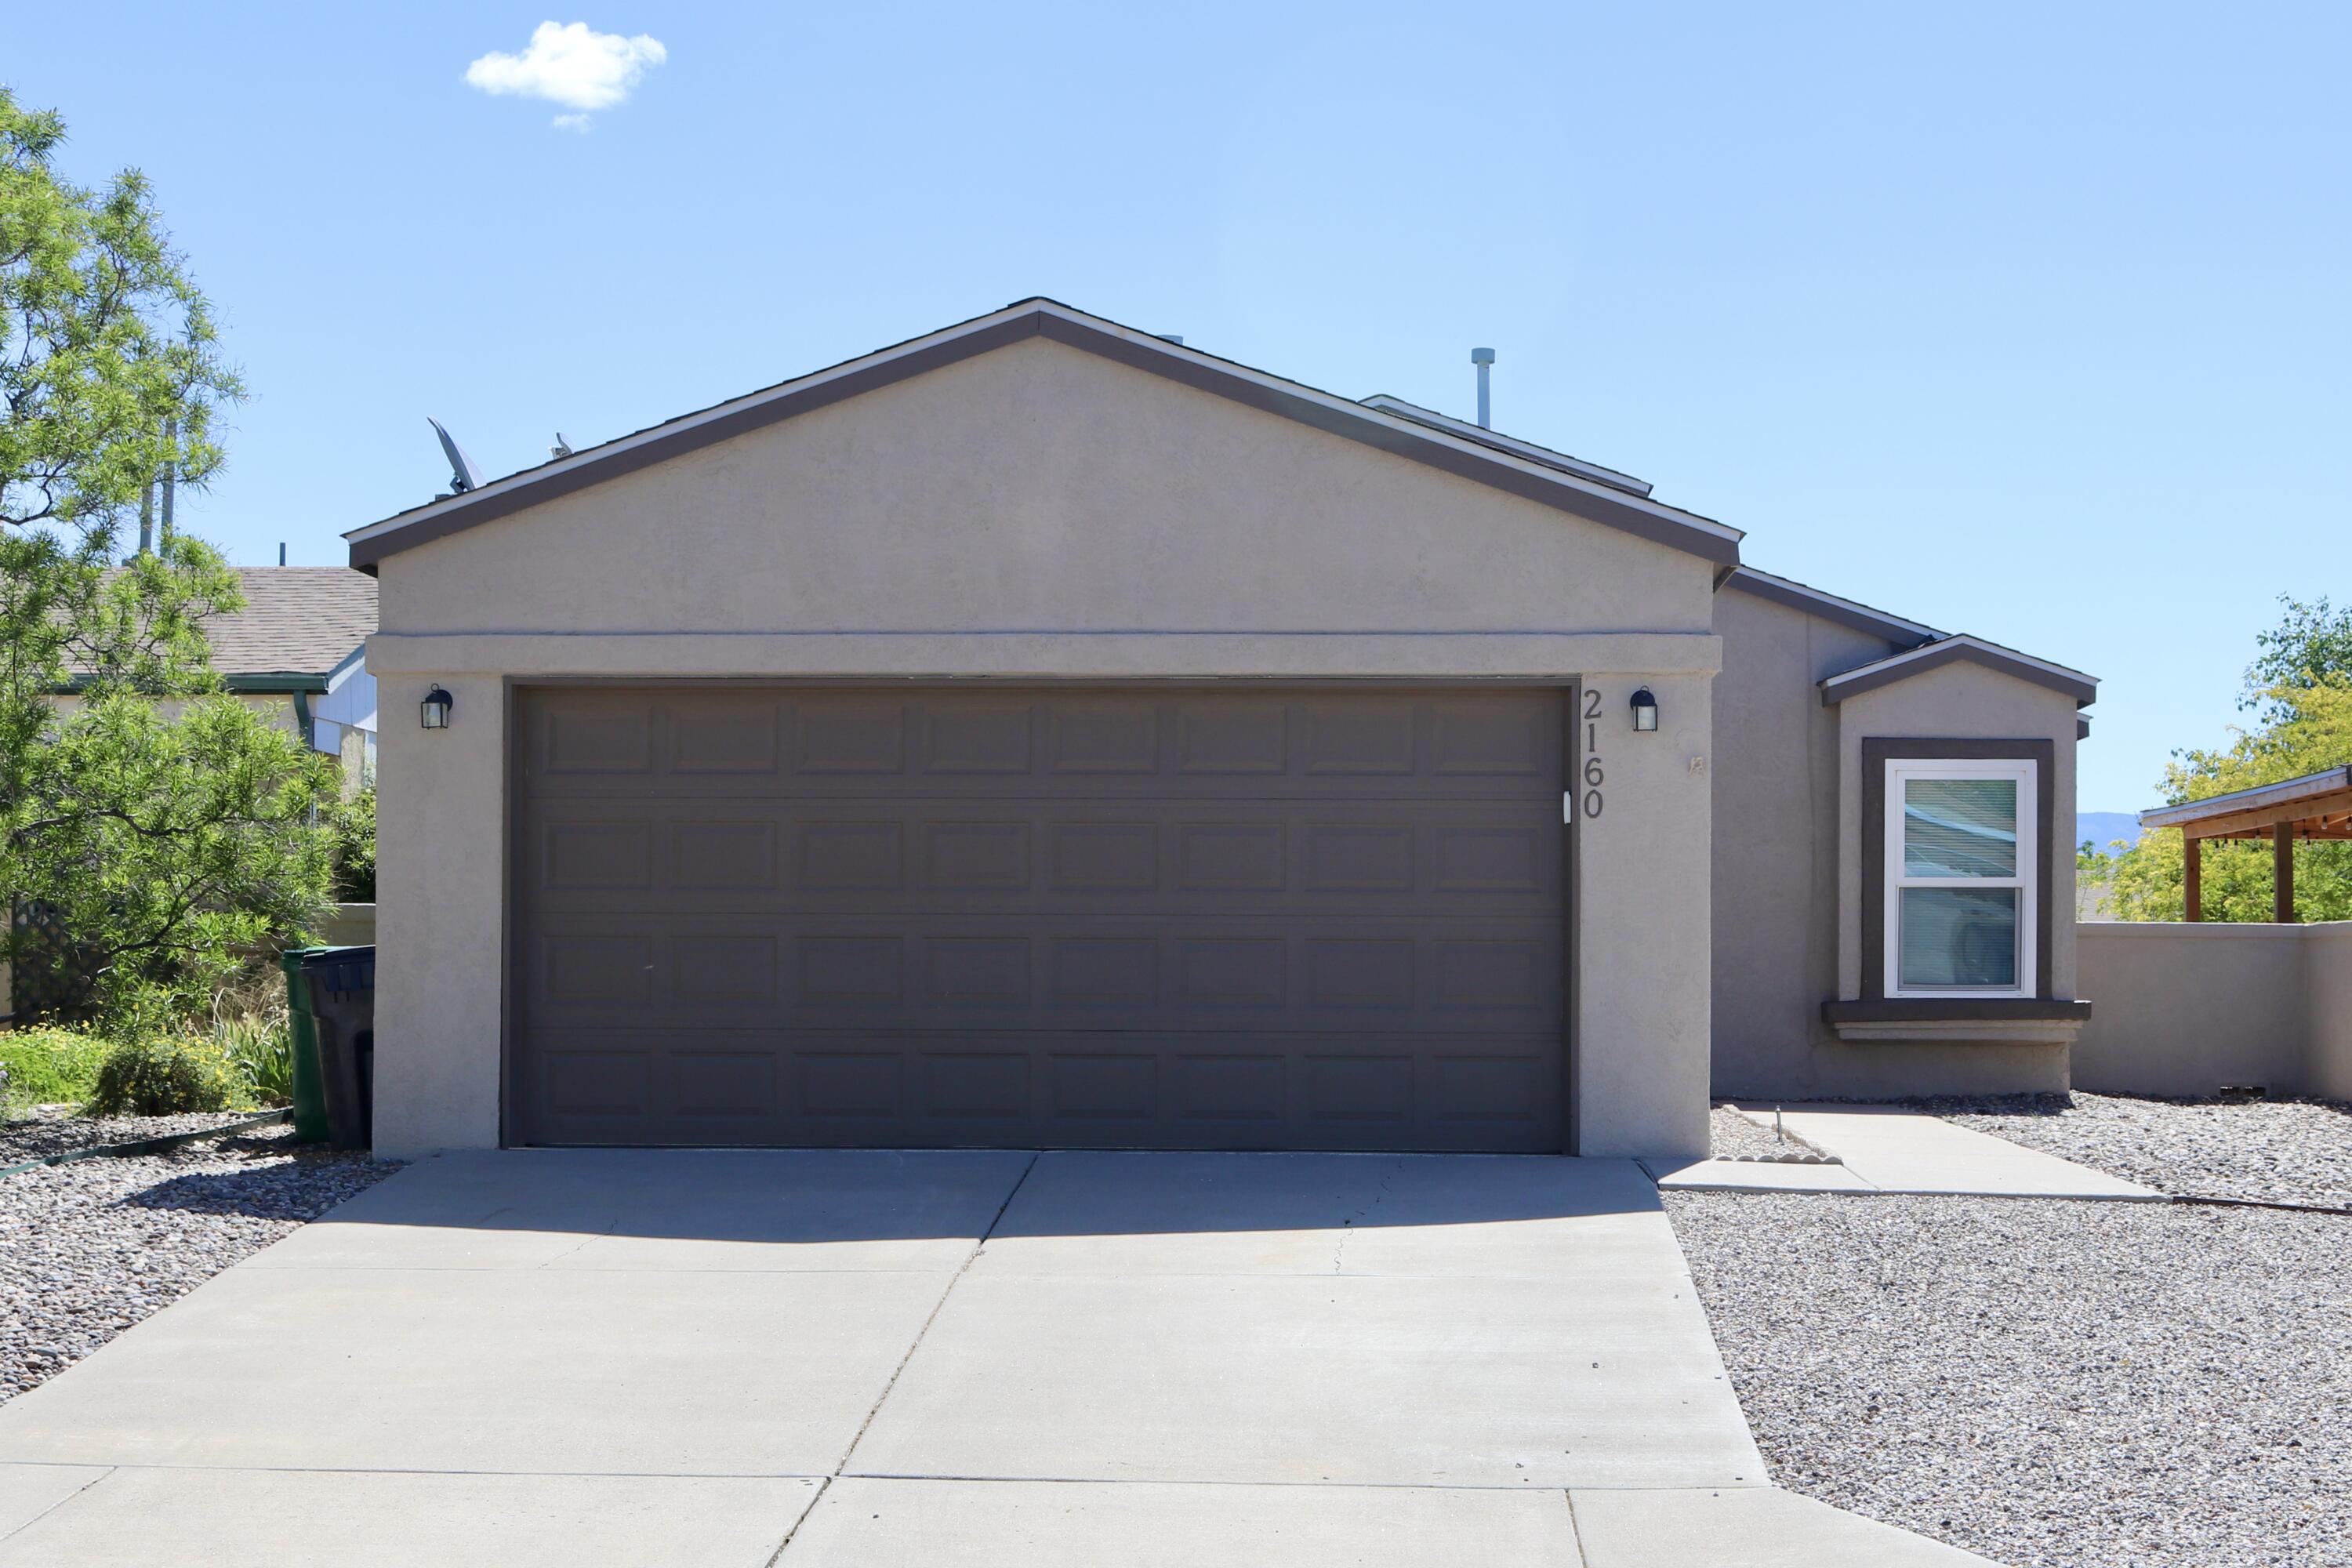 Beautiful, move in ready, single story home in Rio Rancho. Enjoy the easy maintenance of tile floors, refrigerated air, updated ceiling fans and newer windows. New interior and exterior paint in 2021. New plumbing lines installed in 2021.